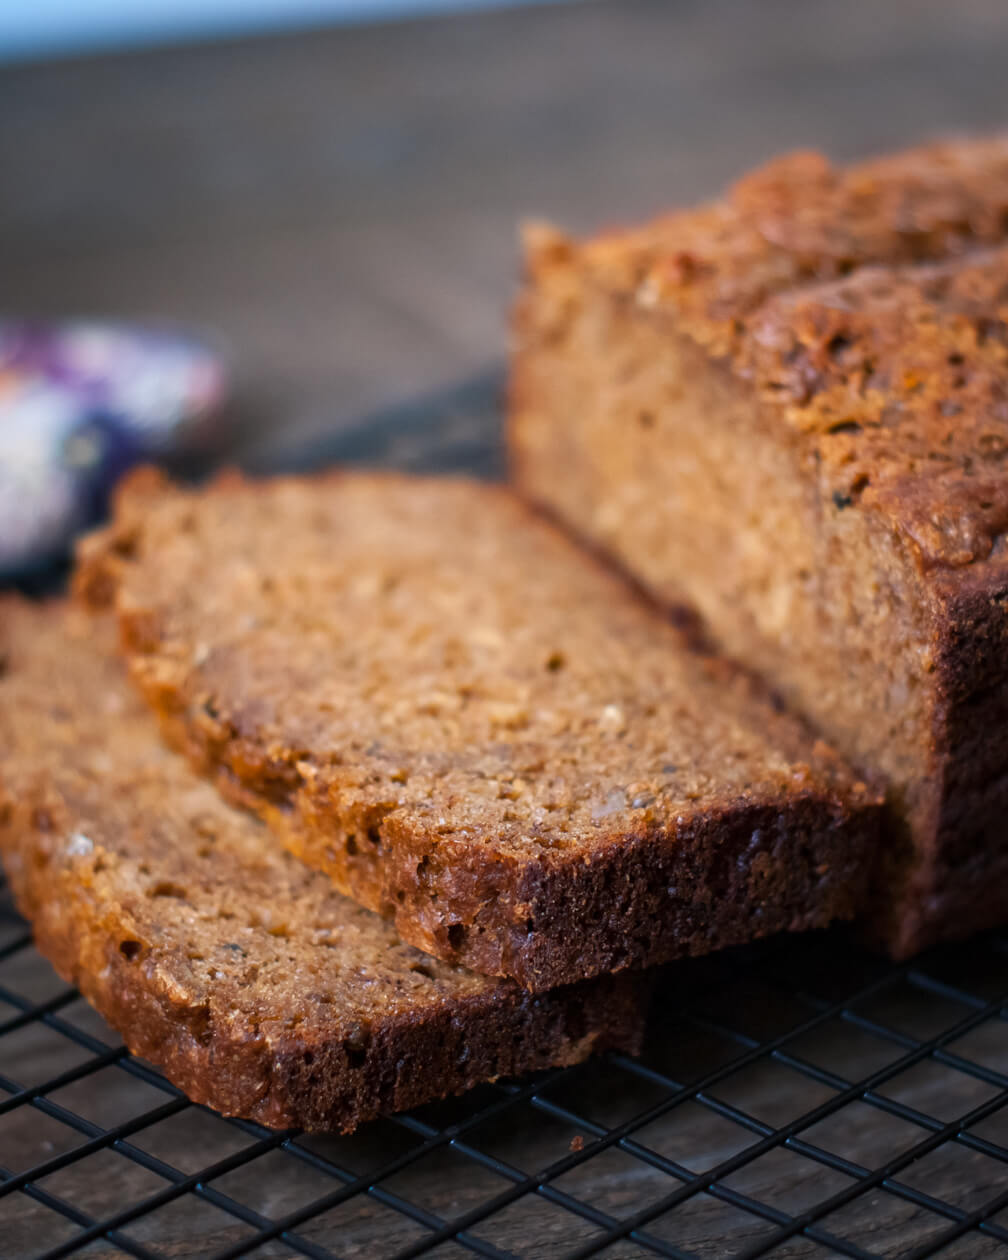 Molasses Banana-Oat Bread hearty with a subtle sweetness. Perfectly satisfying as a wholesome snack or quick meal on the go. An excellent recipe to use over-ripe bananas.